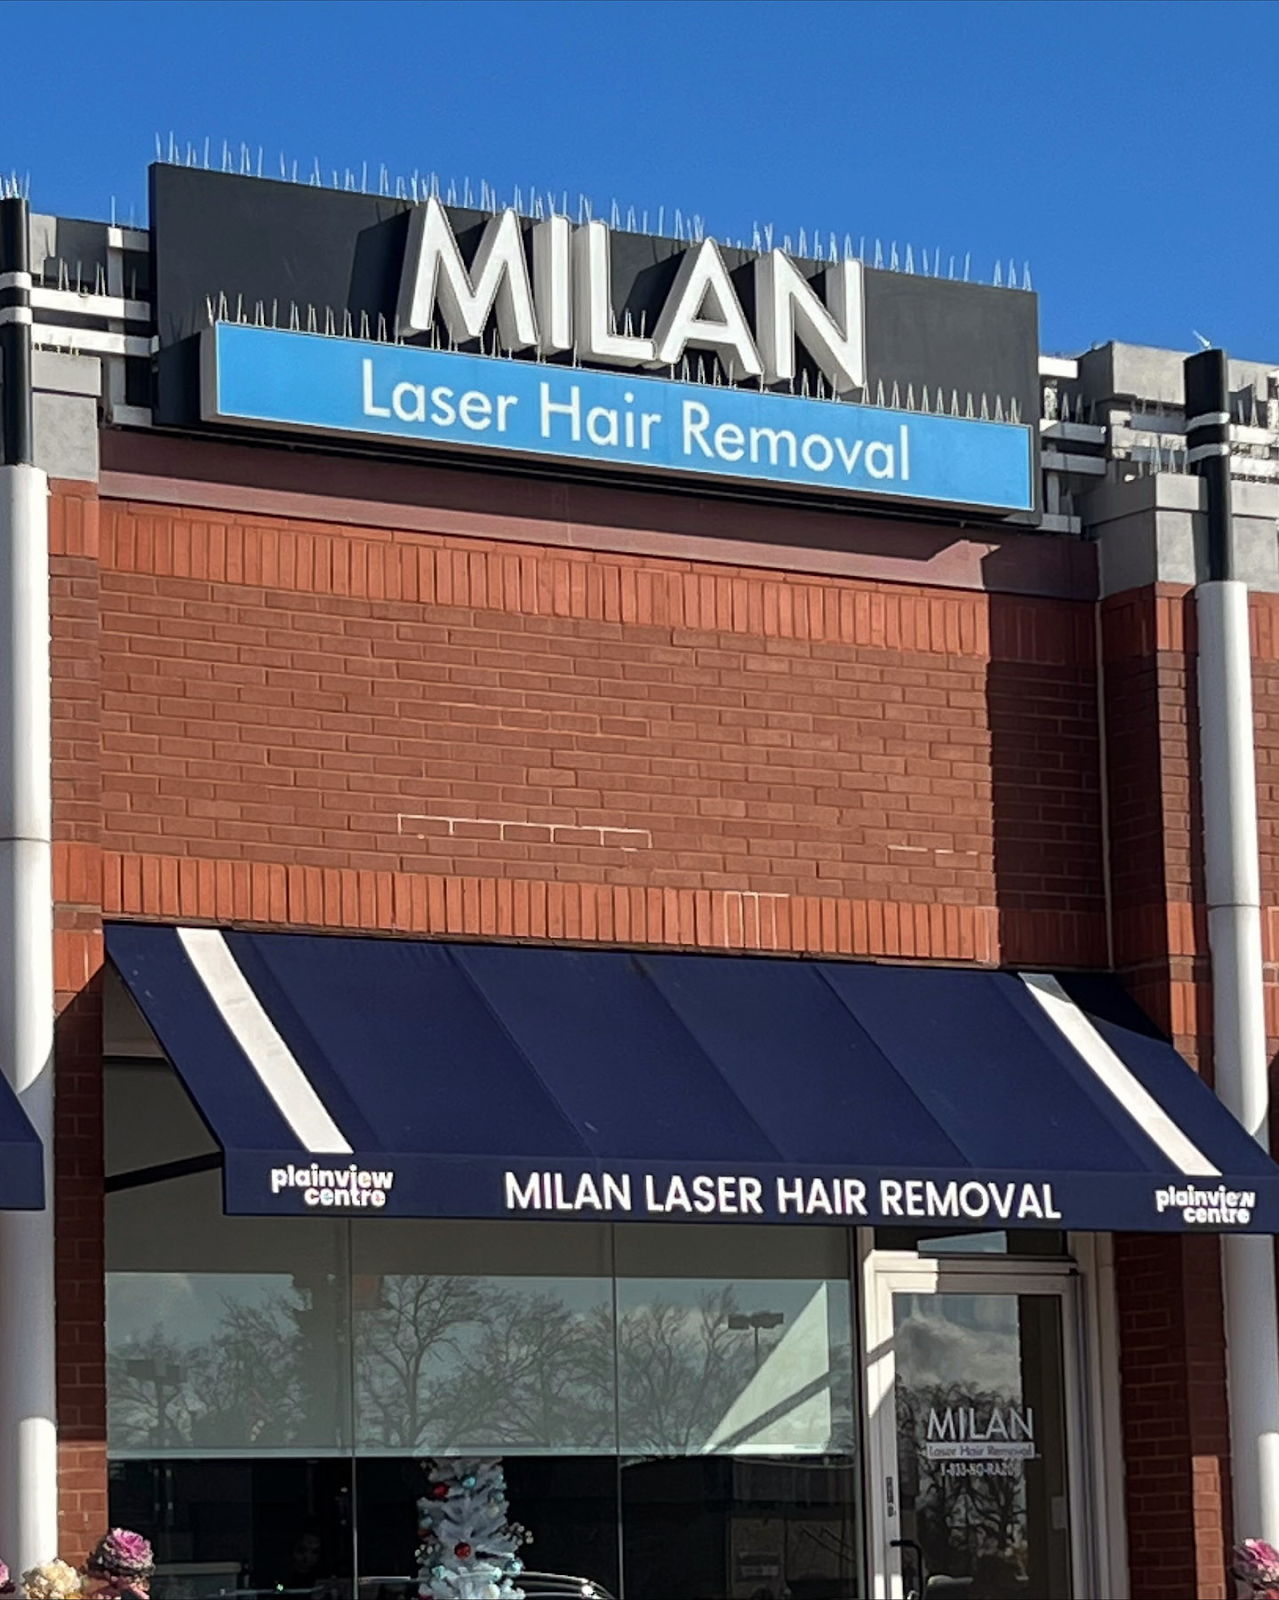 Milan Laser Hair Removal: Picture of the company's signage